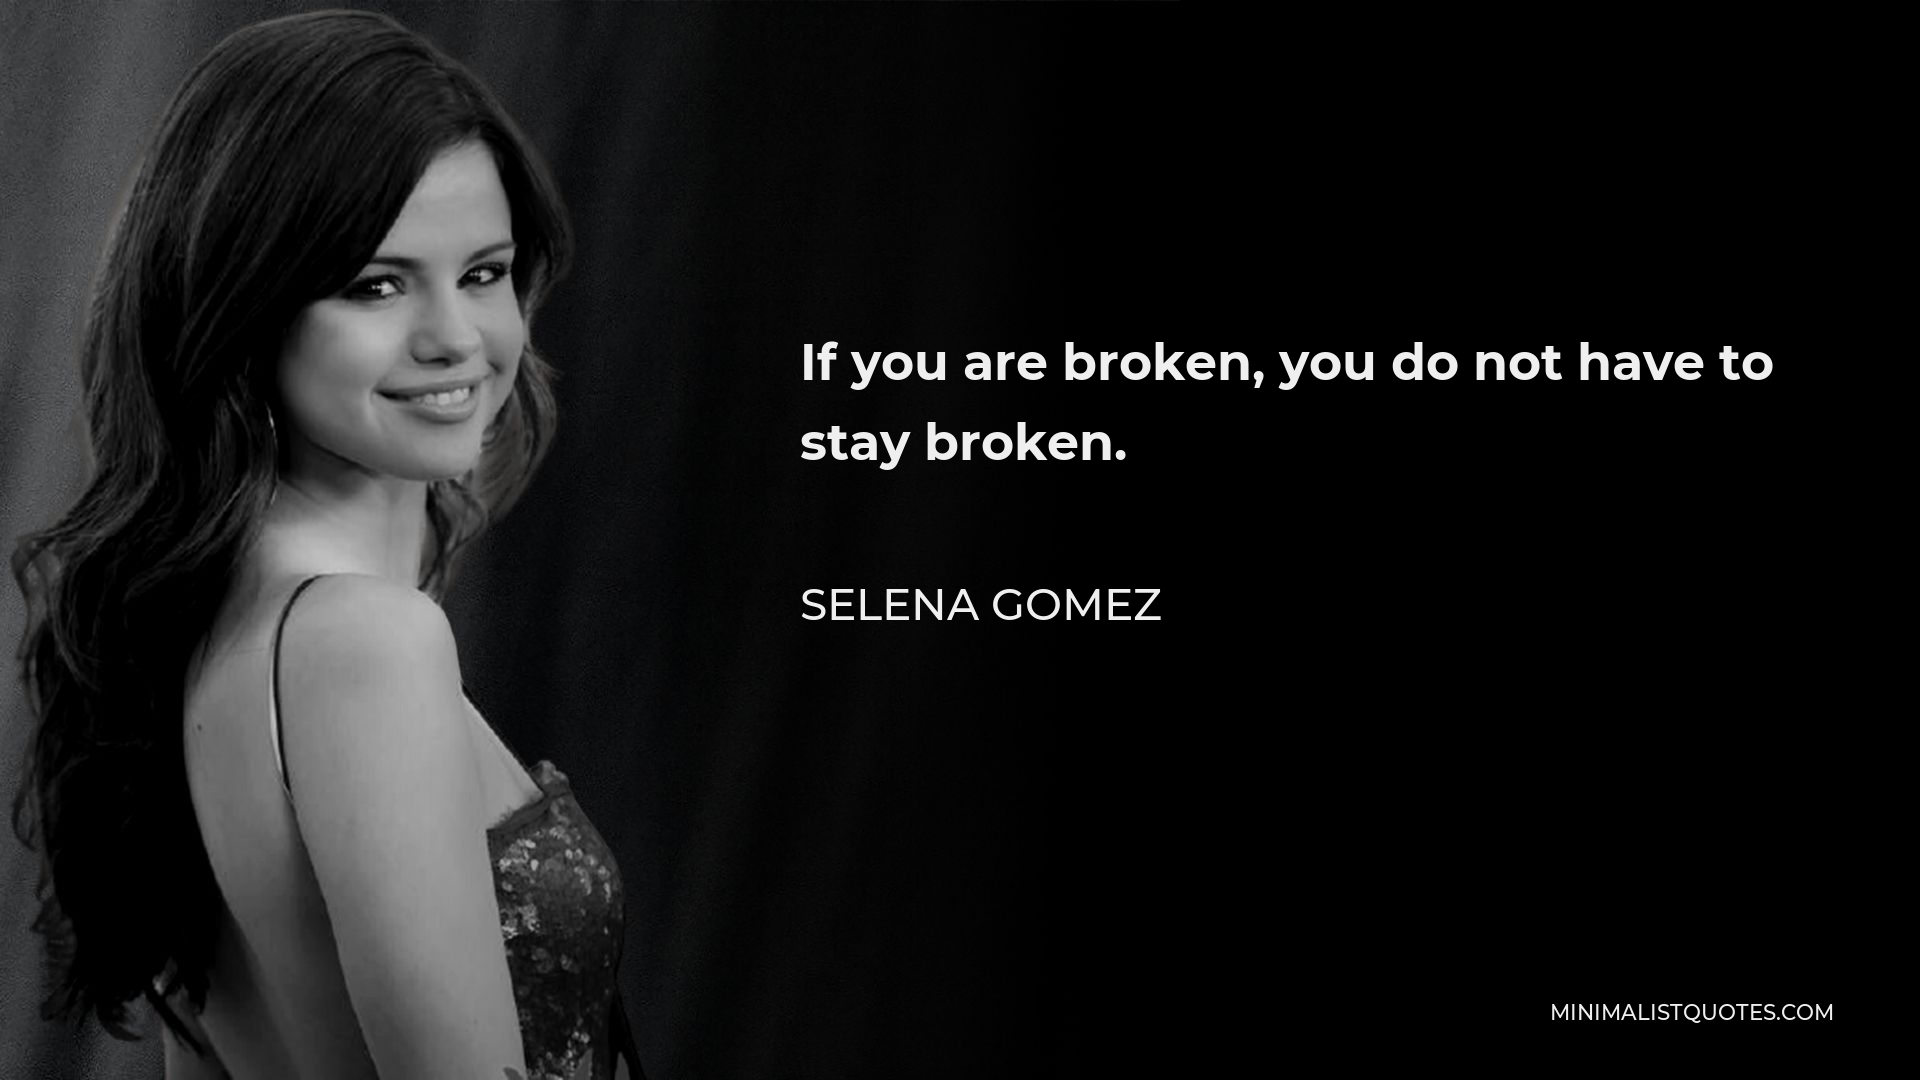 Selena Gomez Quote - If you are broken, you do not have to stay broken.